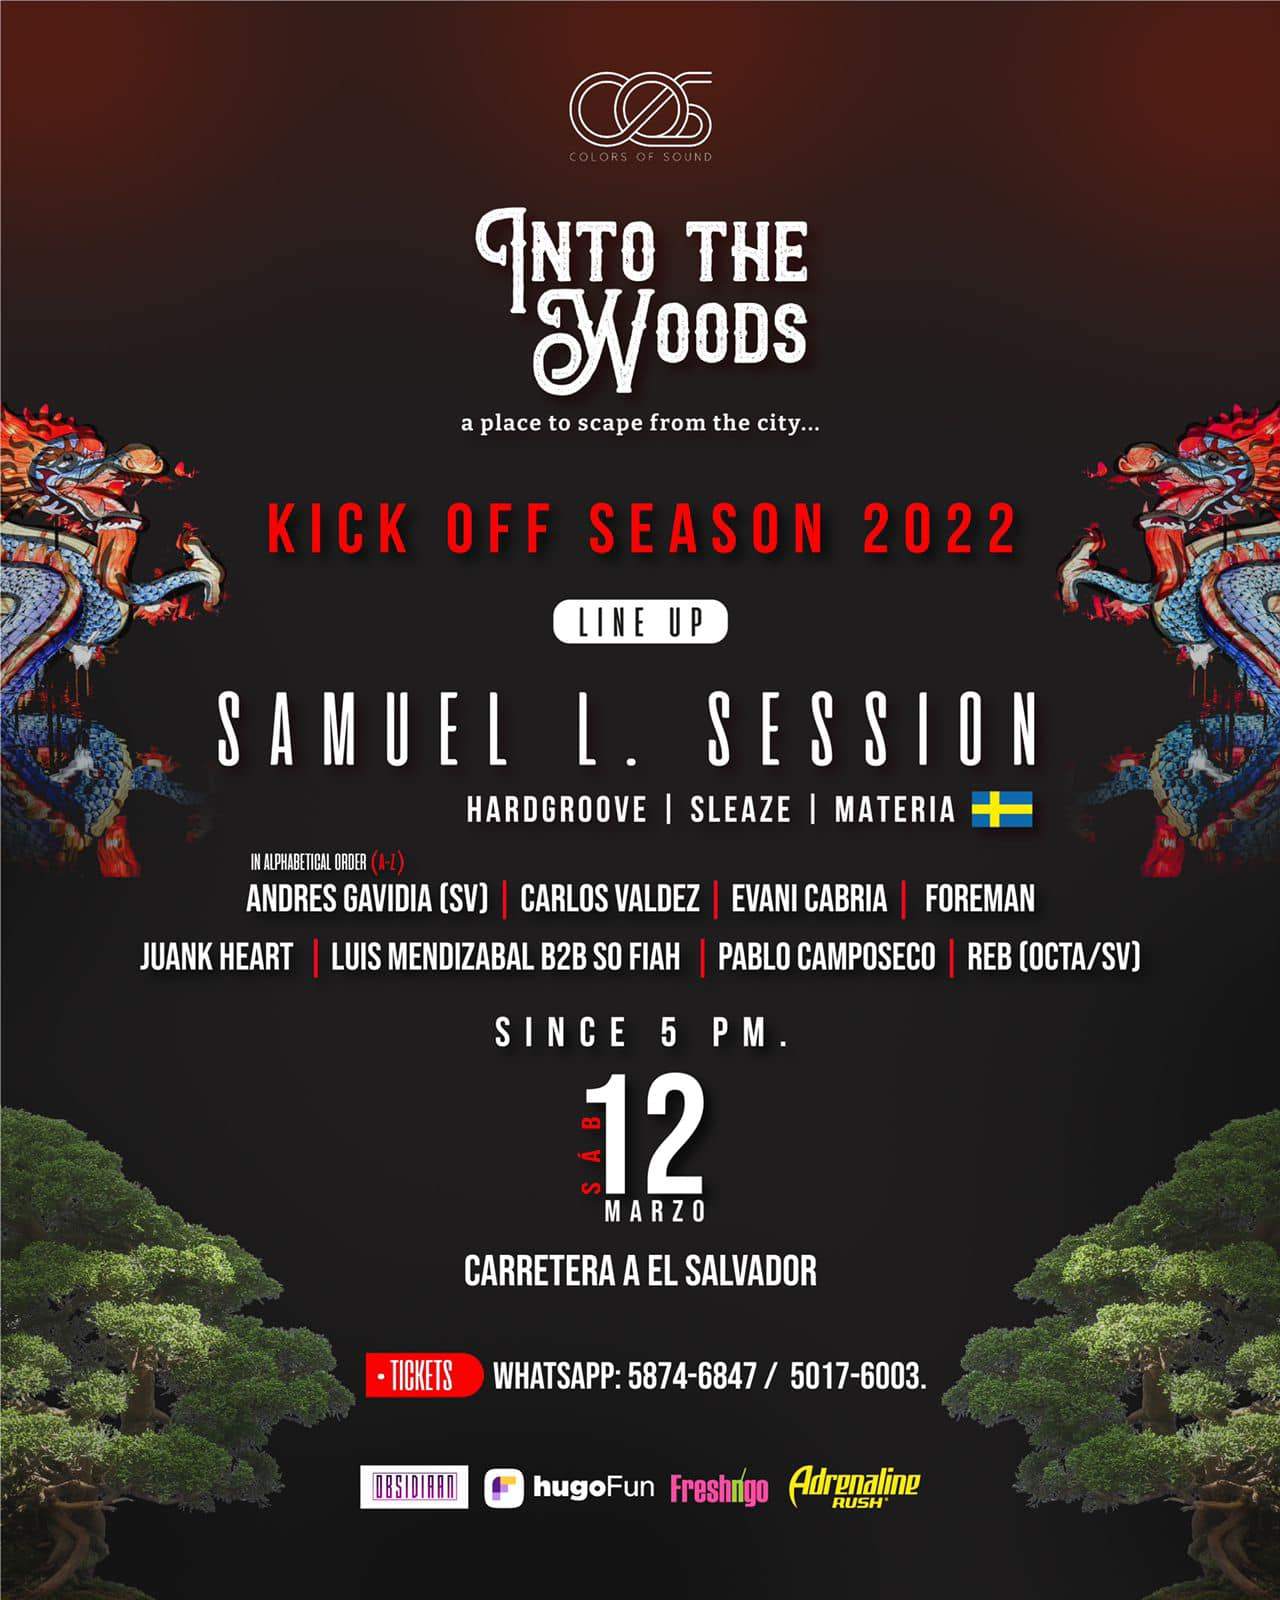 INTO THE WOODS: Kick off Season with Samuel L. Session - フライヤー表